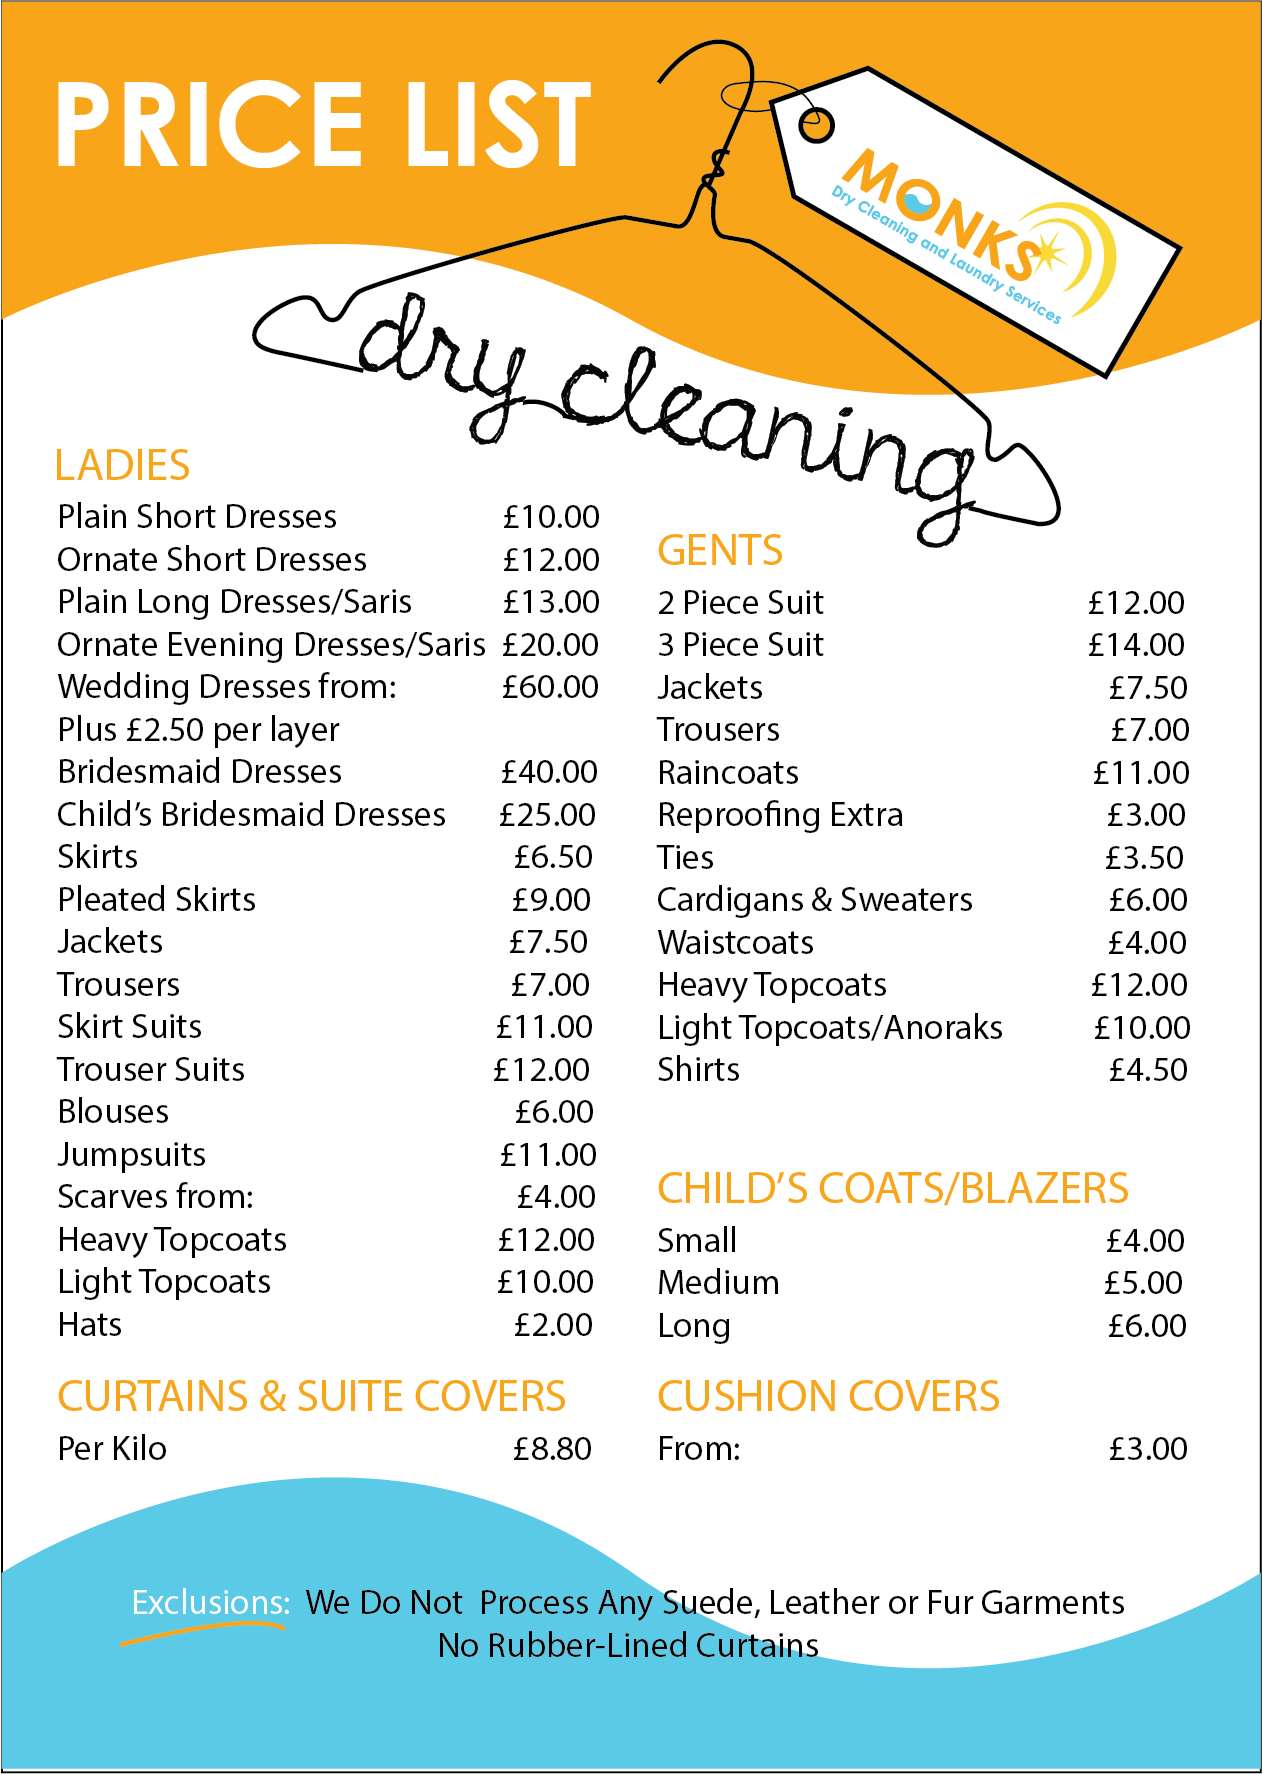 dry-cleaning-price-list-how-do-you-price-a-switches